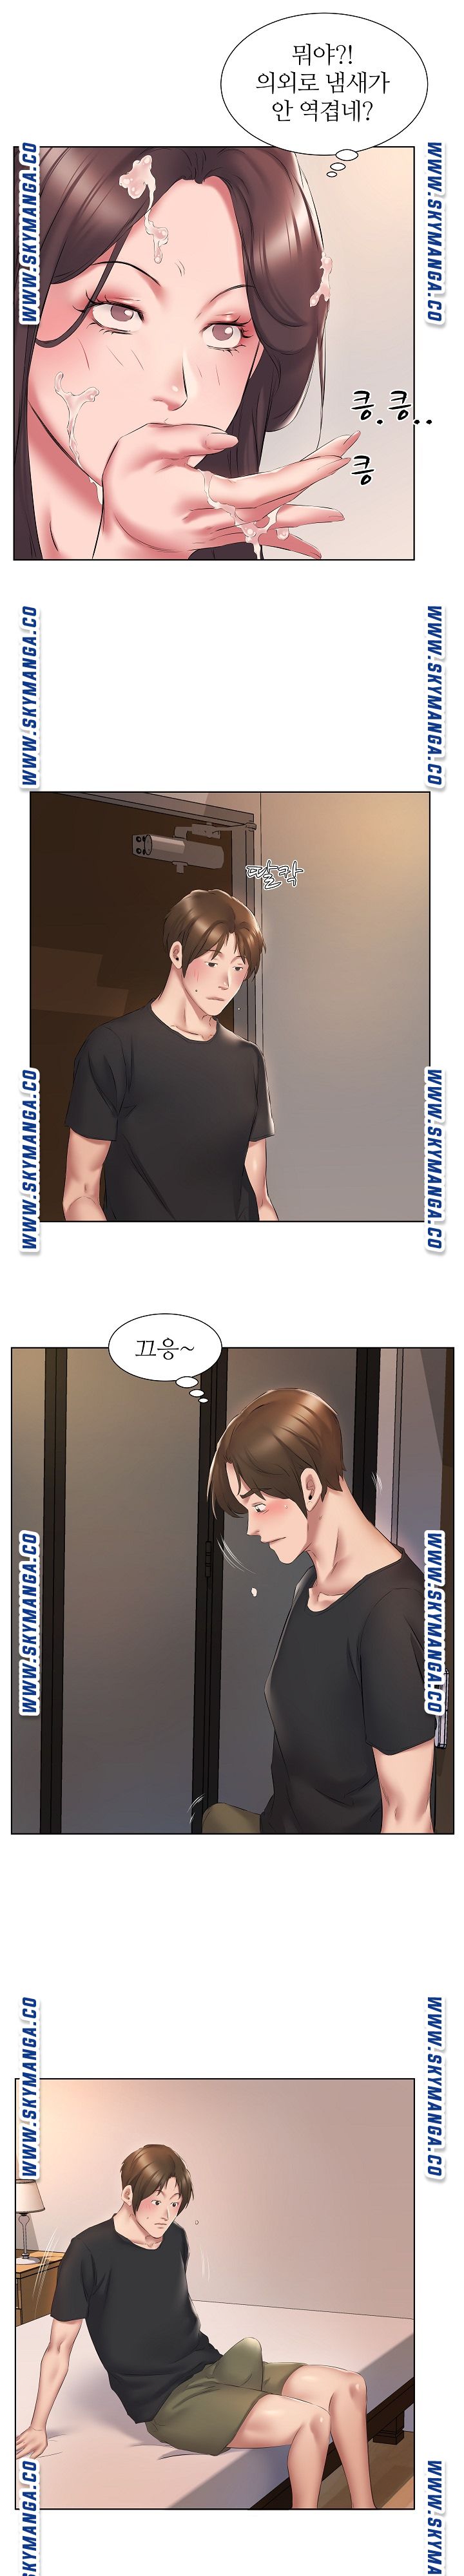 One Room Hotel Raw - Chapter 3 Page 5